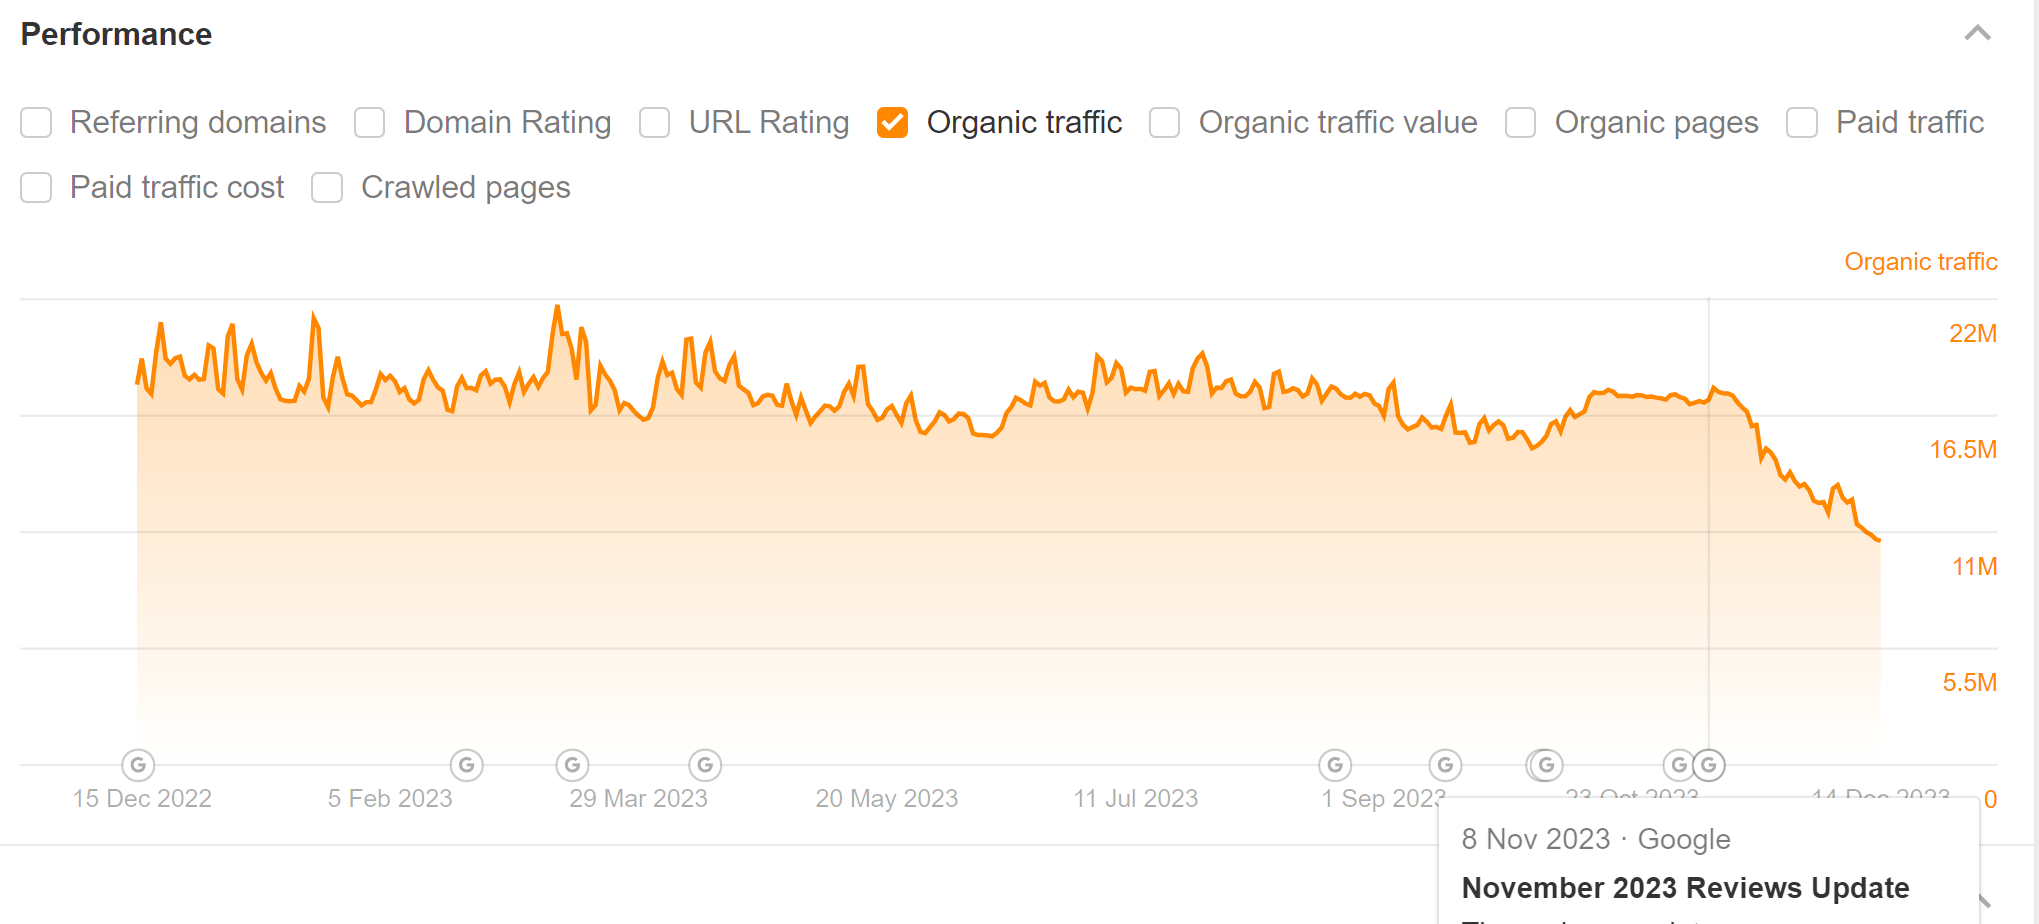 The organic traffic graph in Ahrefs' Site Explorer, showing Google updates and a drop to a site's traffic after the recent Reviews Update